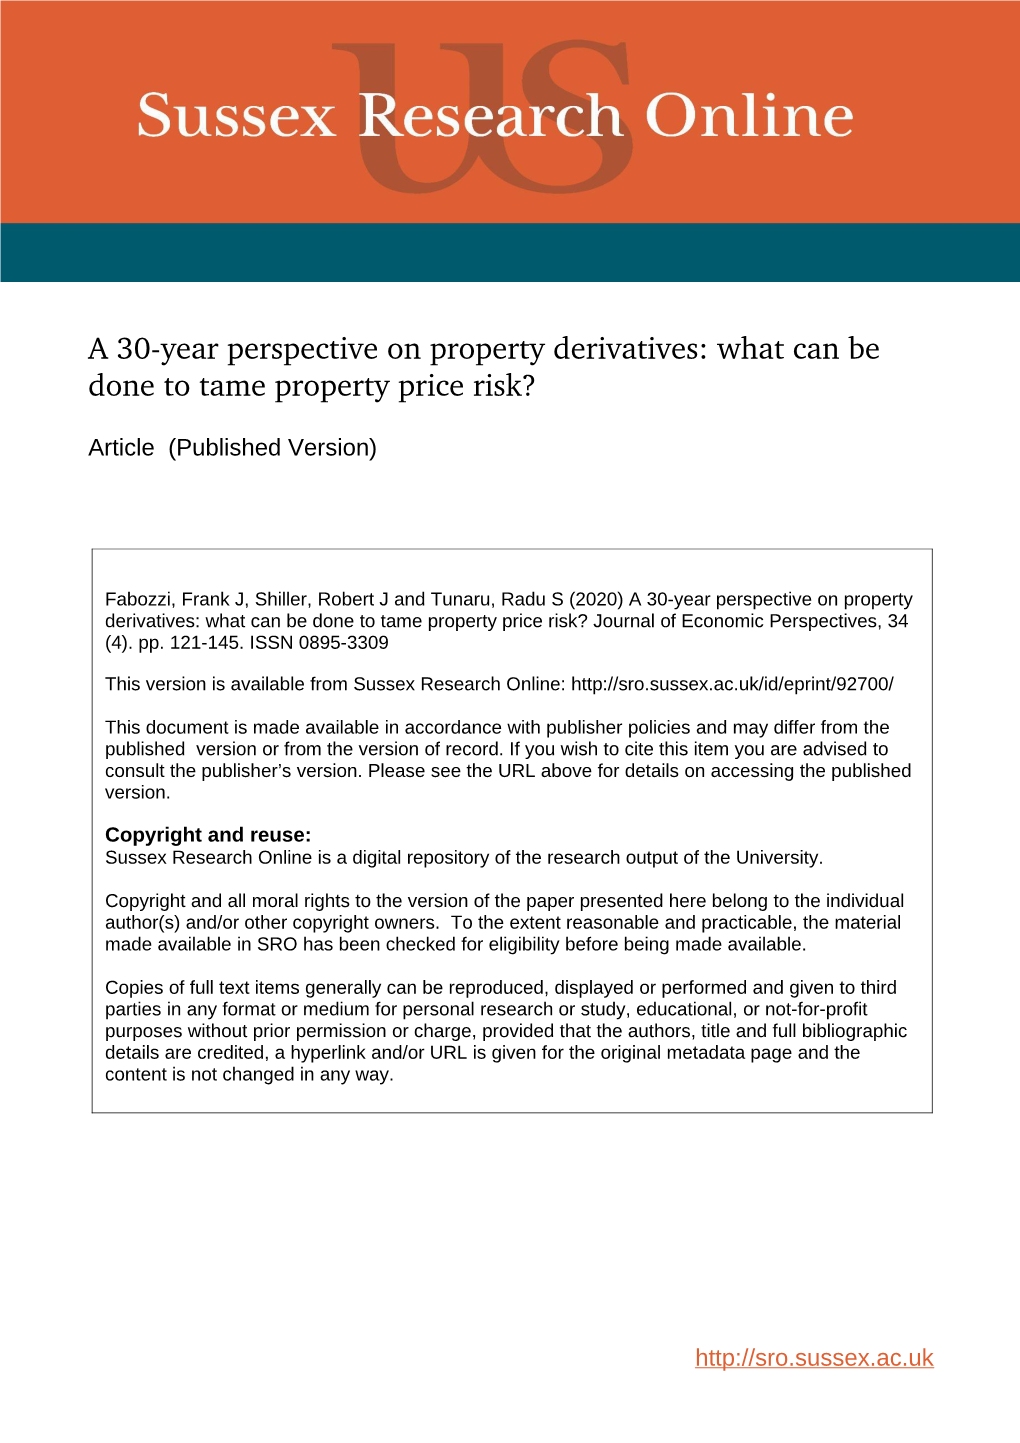 A 30-Year Perspective on Property Derivatives: What Can Be Done to Tame Property Price Risk? Journal of Economic Perspectives, 34 (4)